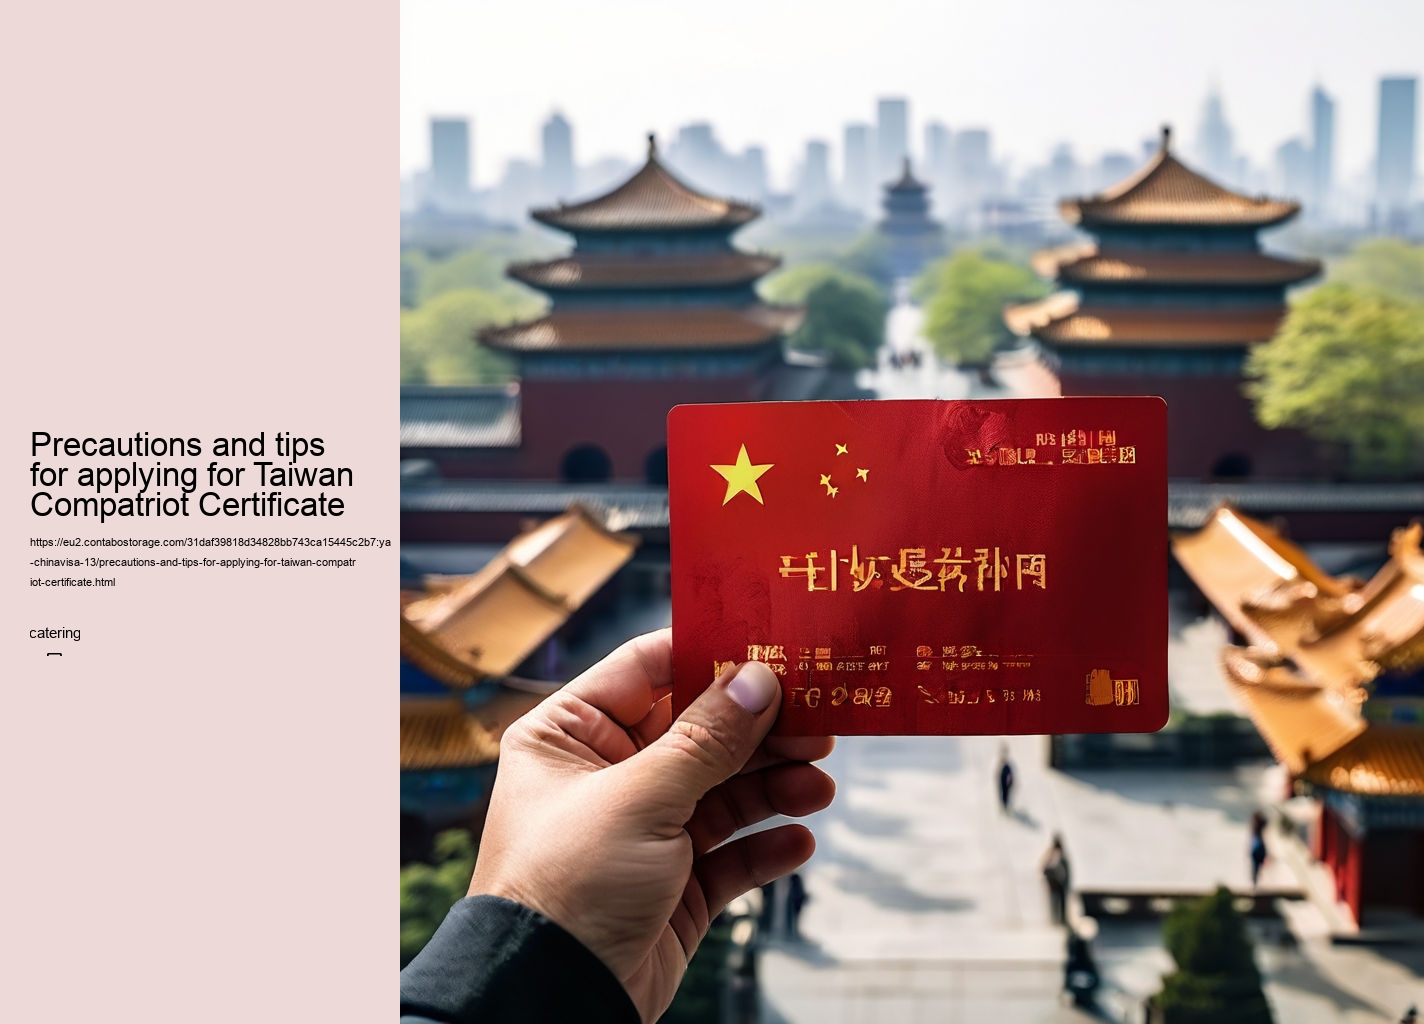 Precautions and tips for applying for Taiwan Compatriot Certificate